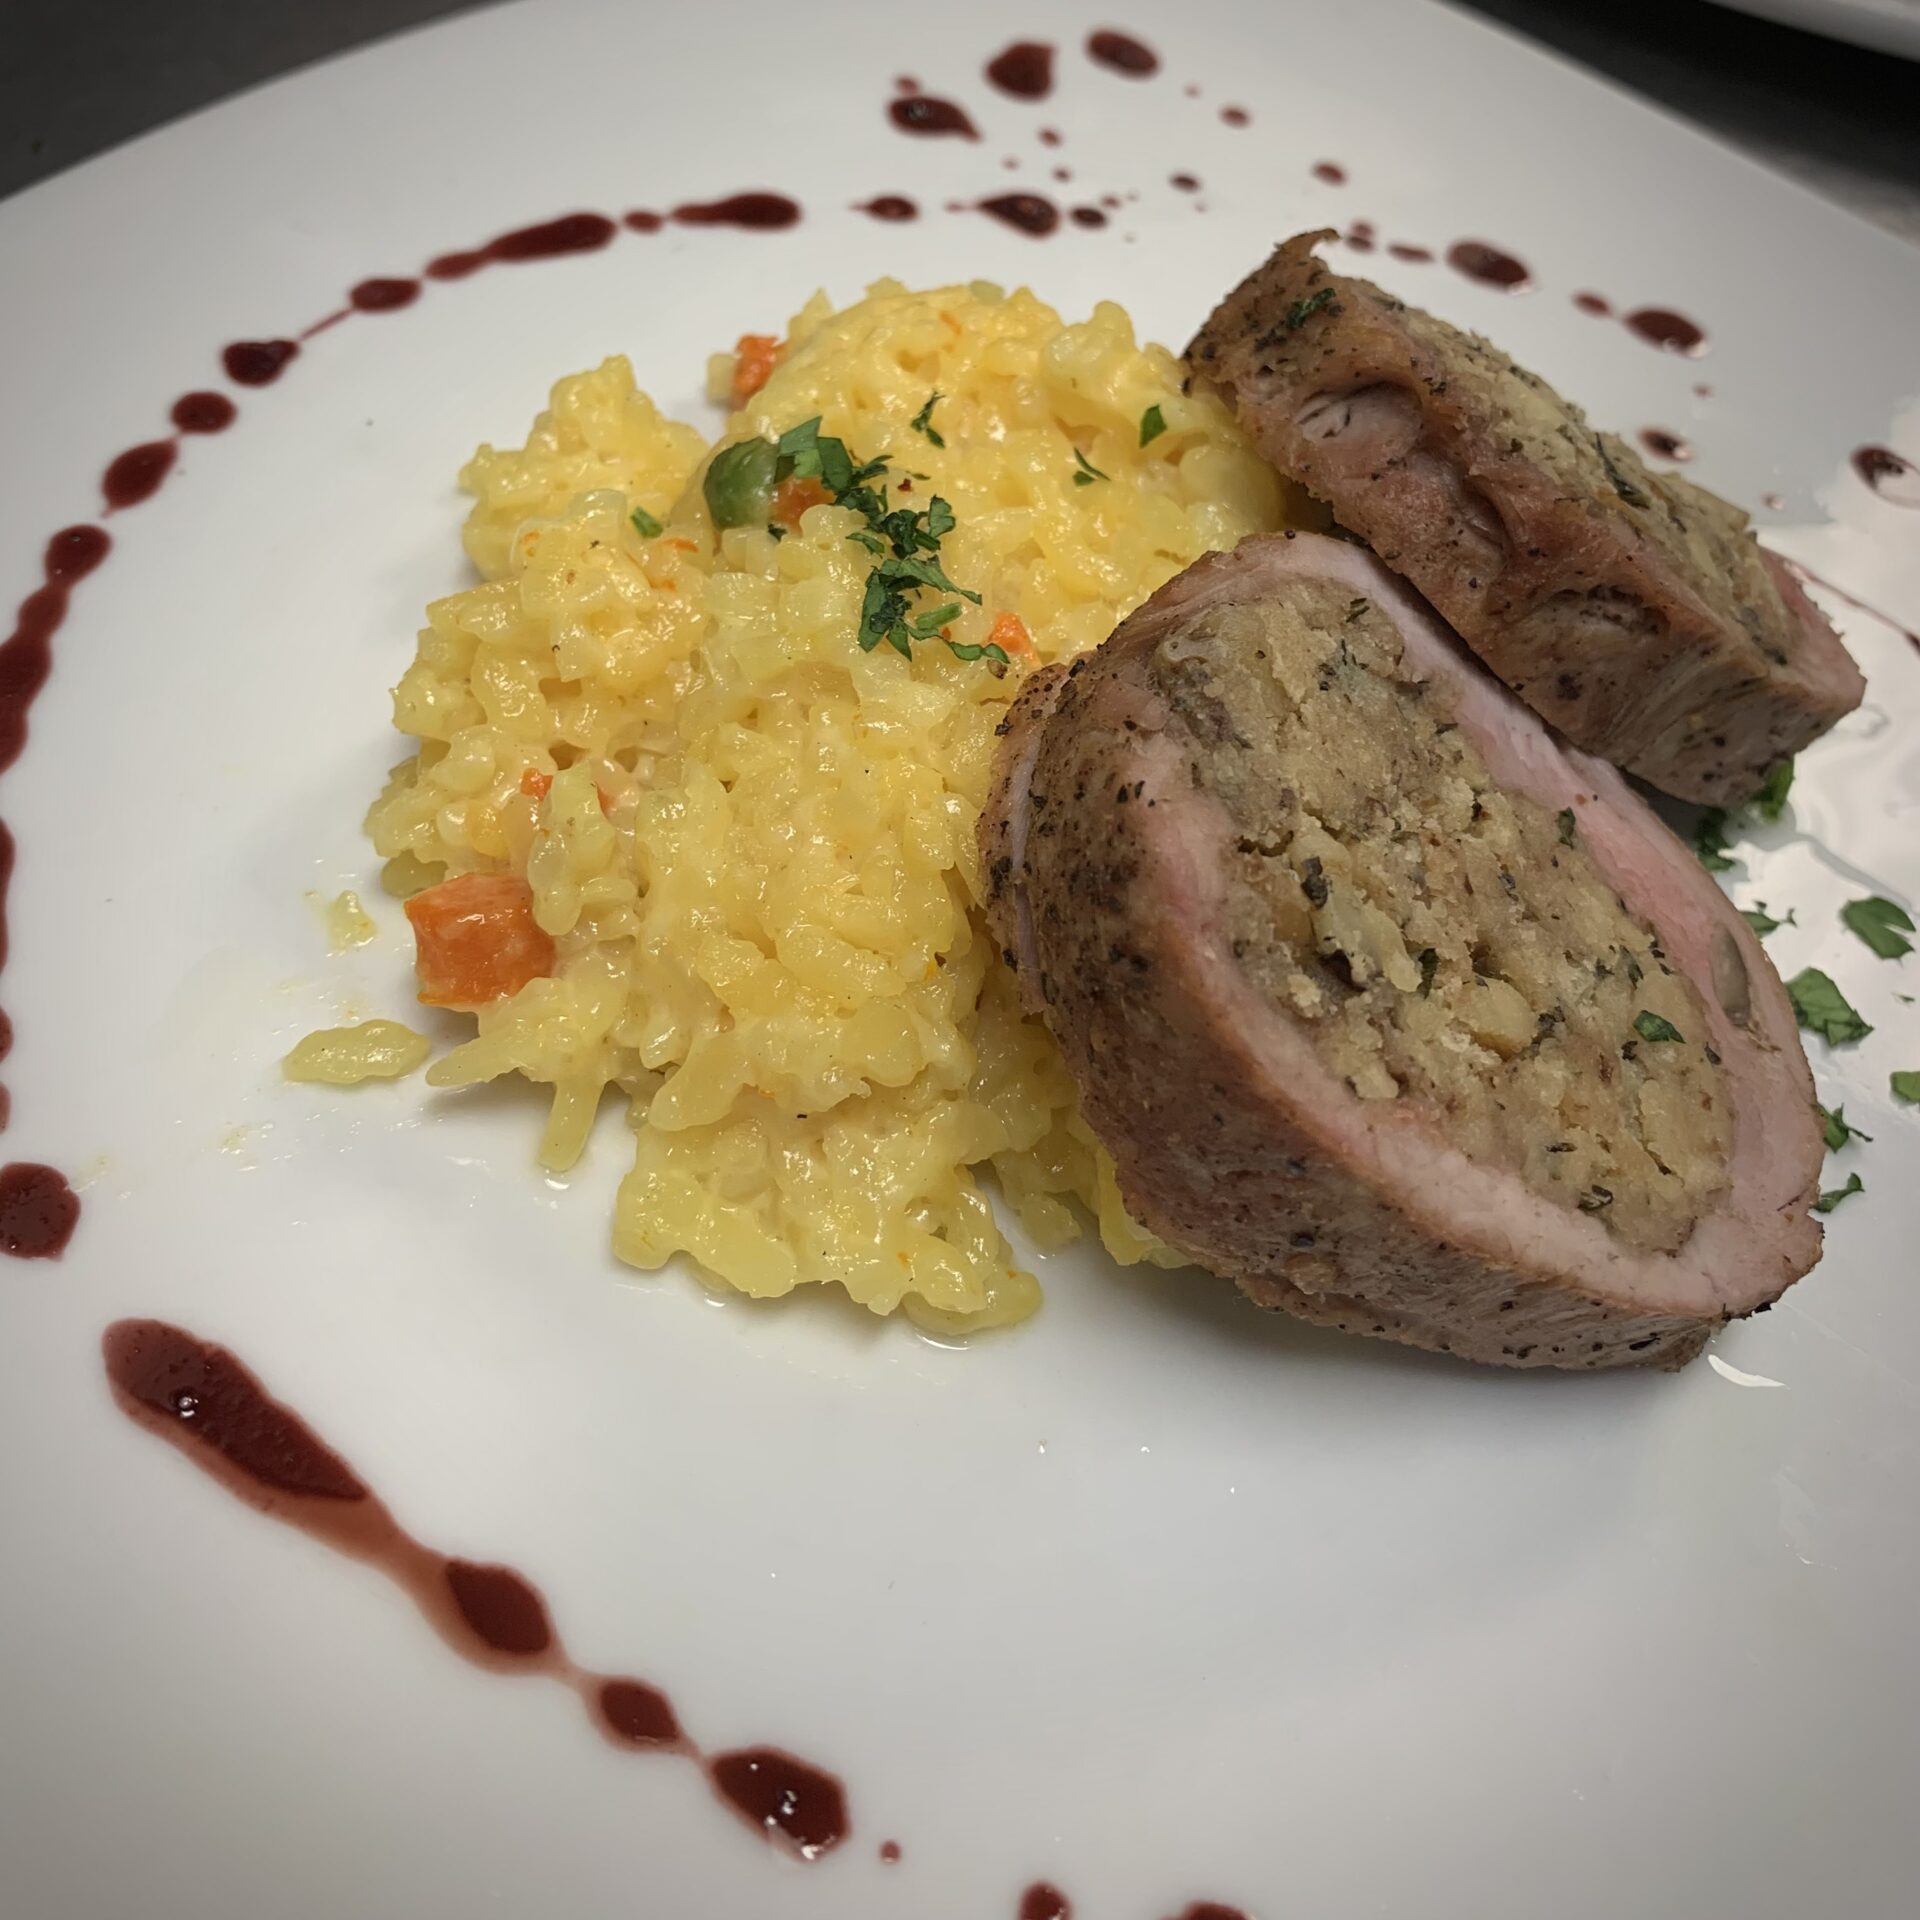 Two stuffed meat slices on top of sticky yellow rice